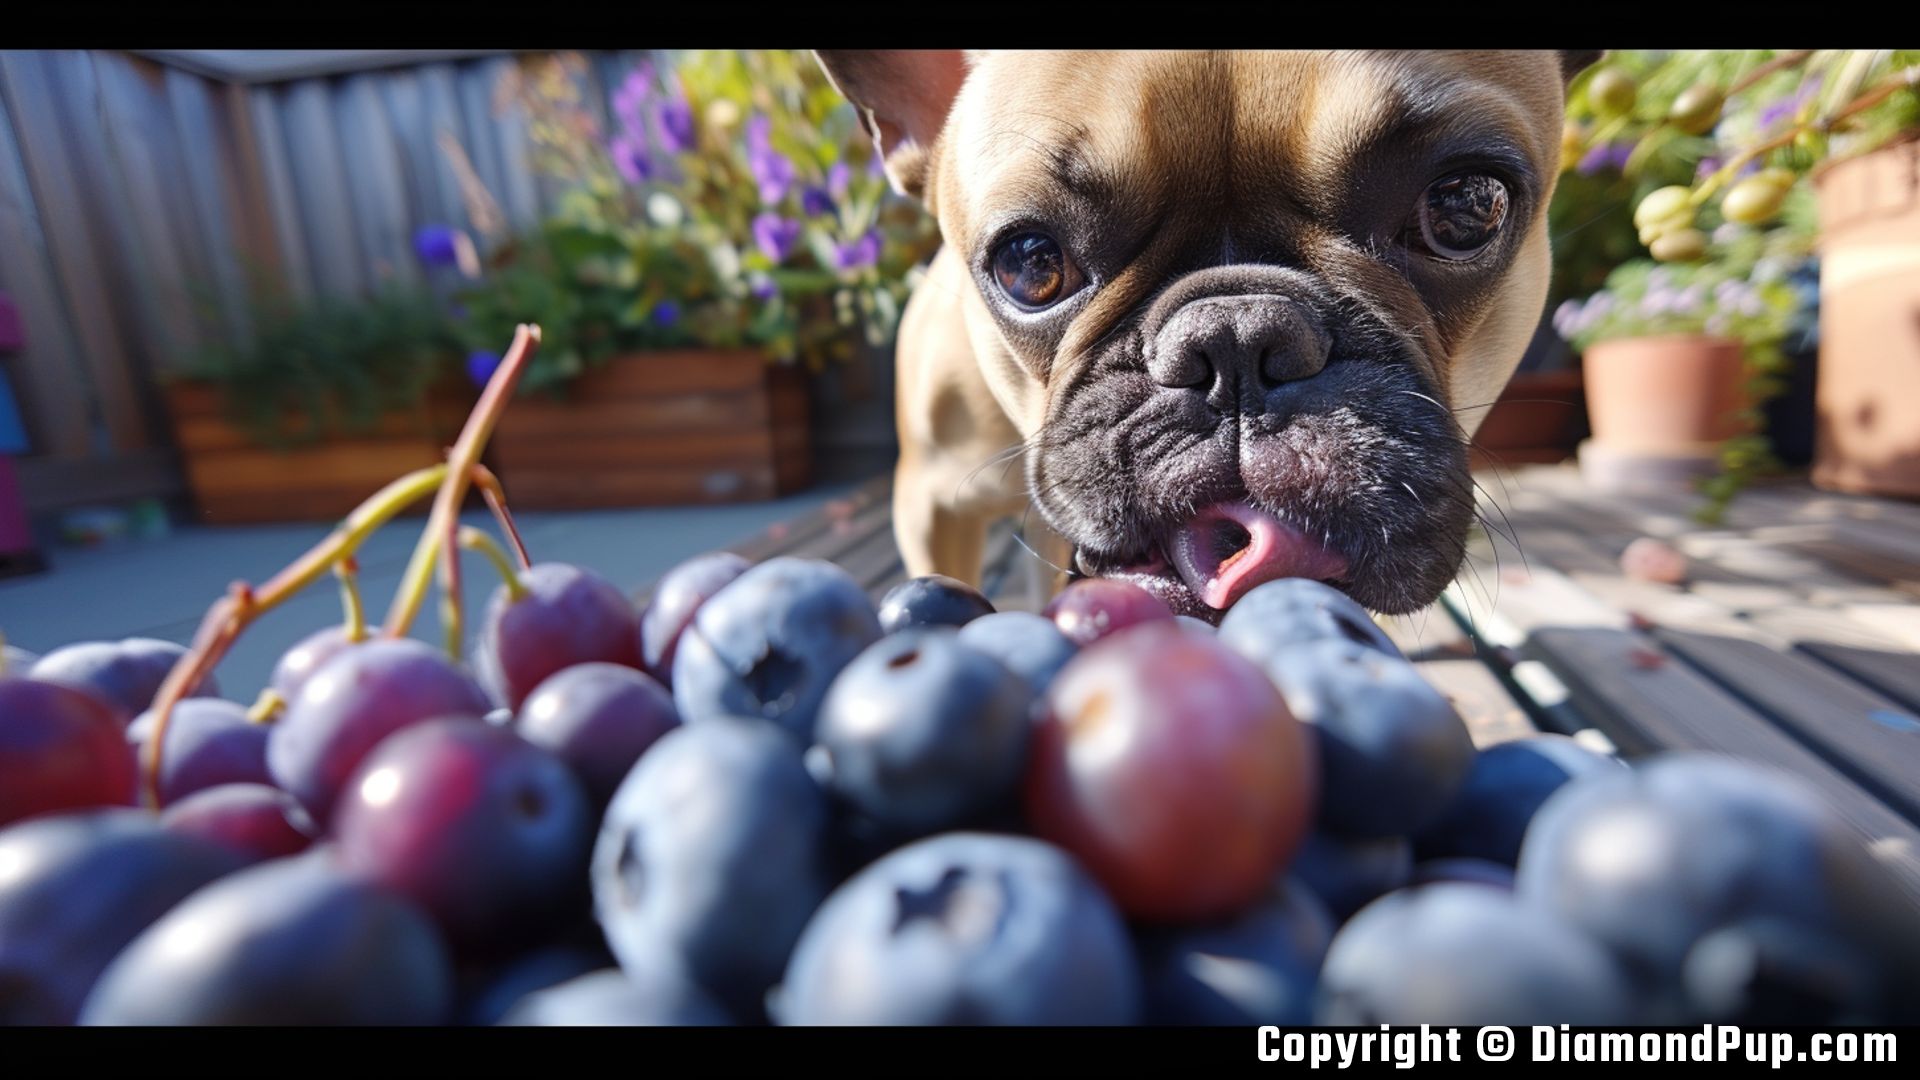 Photo of a Playful French Bulldog Eating Blueberries